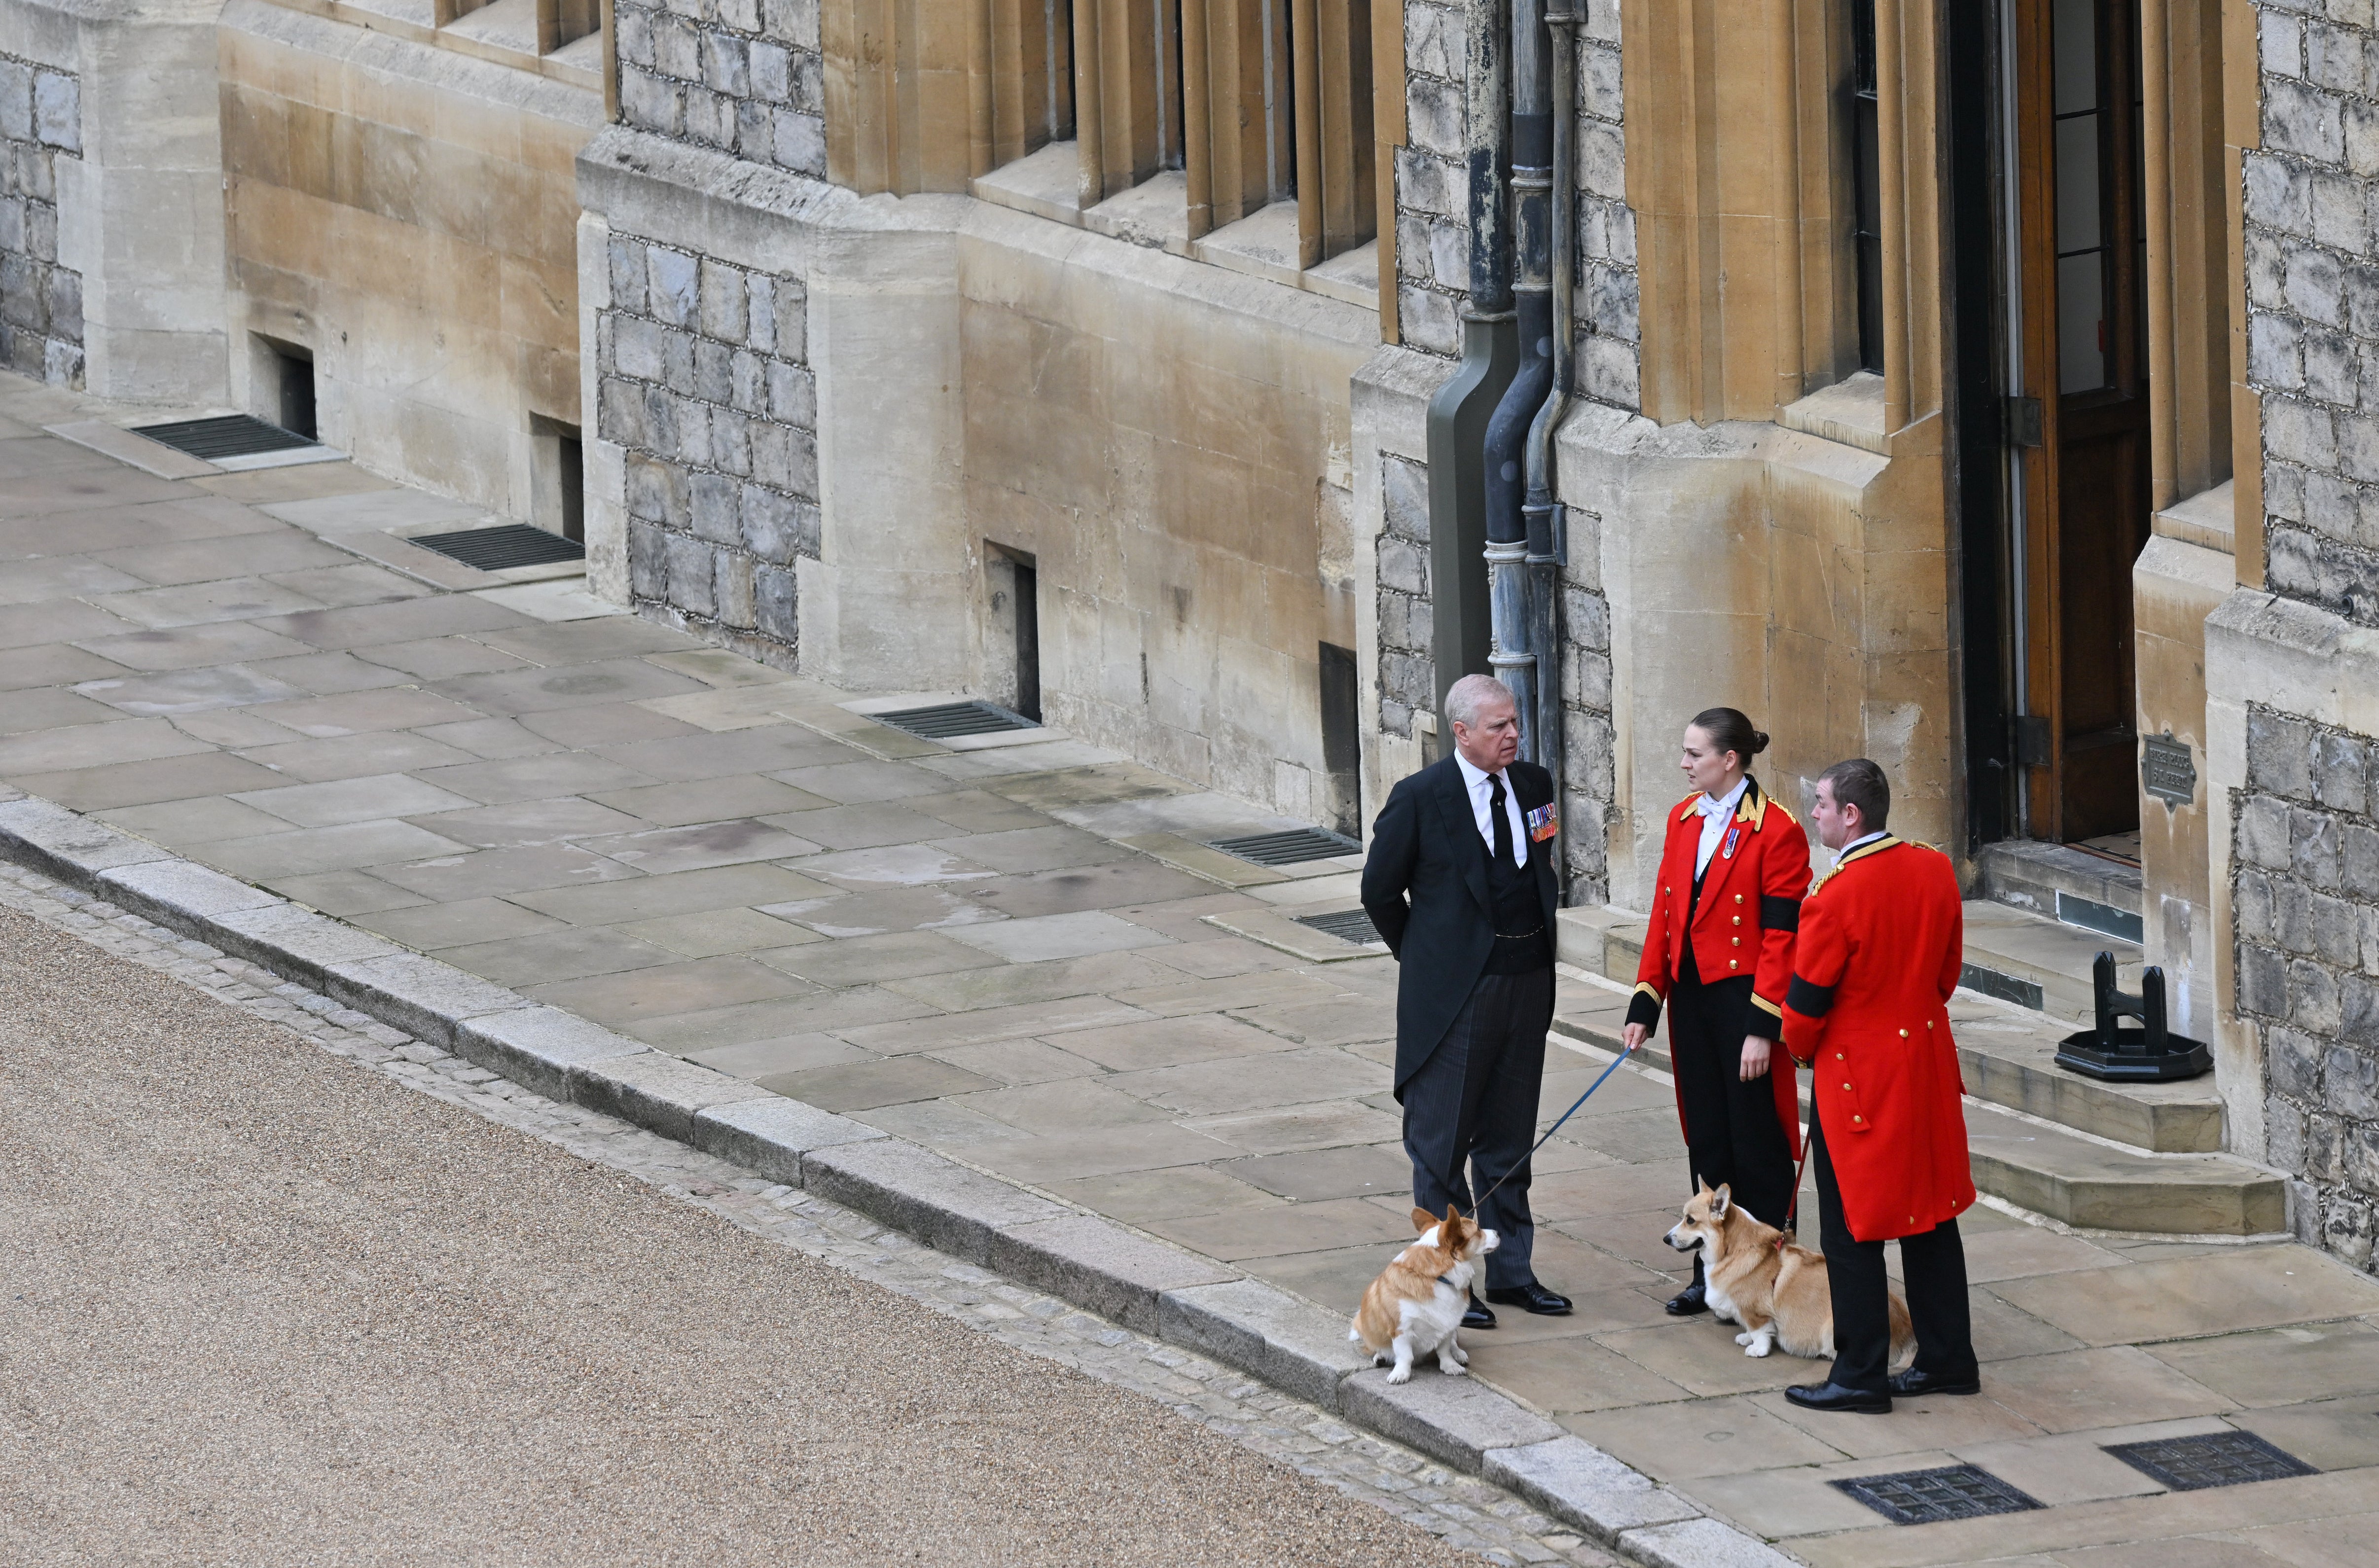 The Queen’s two corgis, Muick and Sandy, with the Duke of York and footmen during the procession through Windsor Castle (Glyn Kirk/PA)